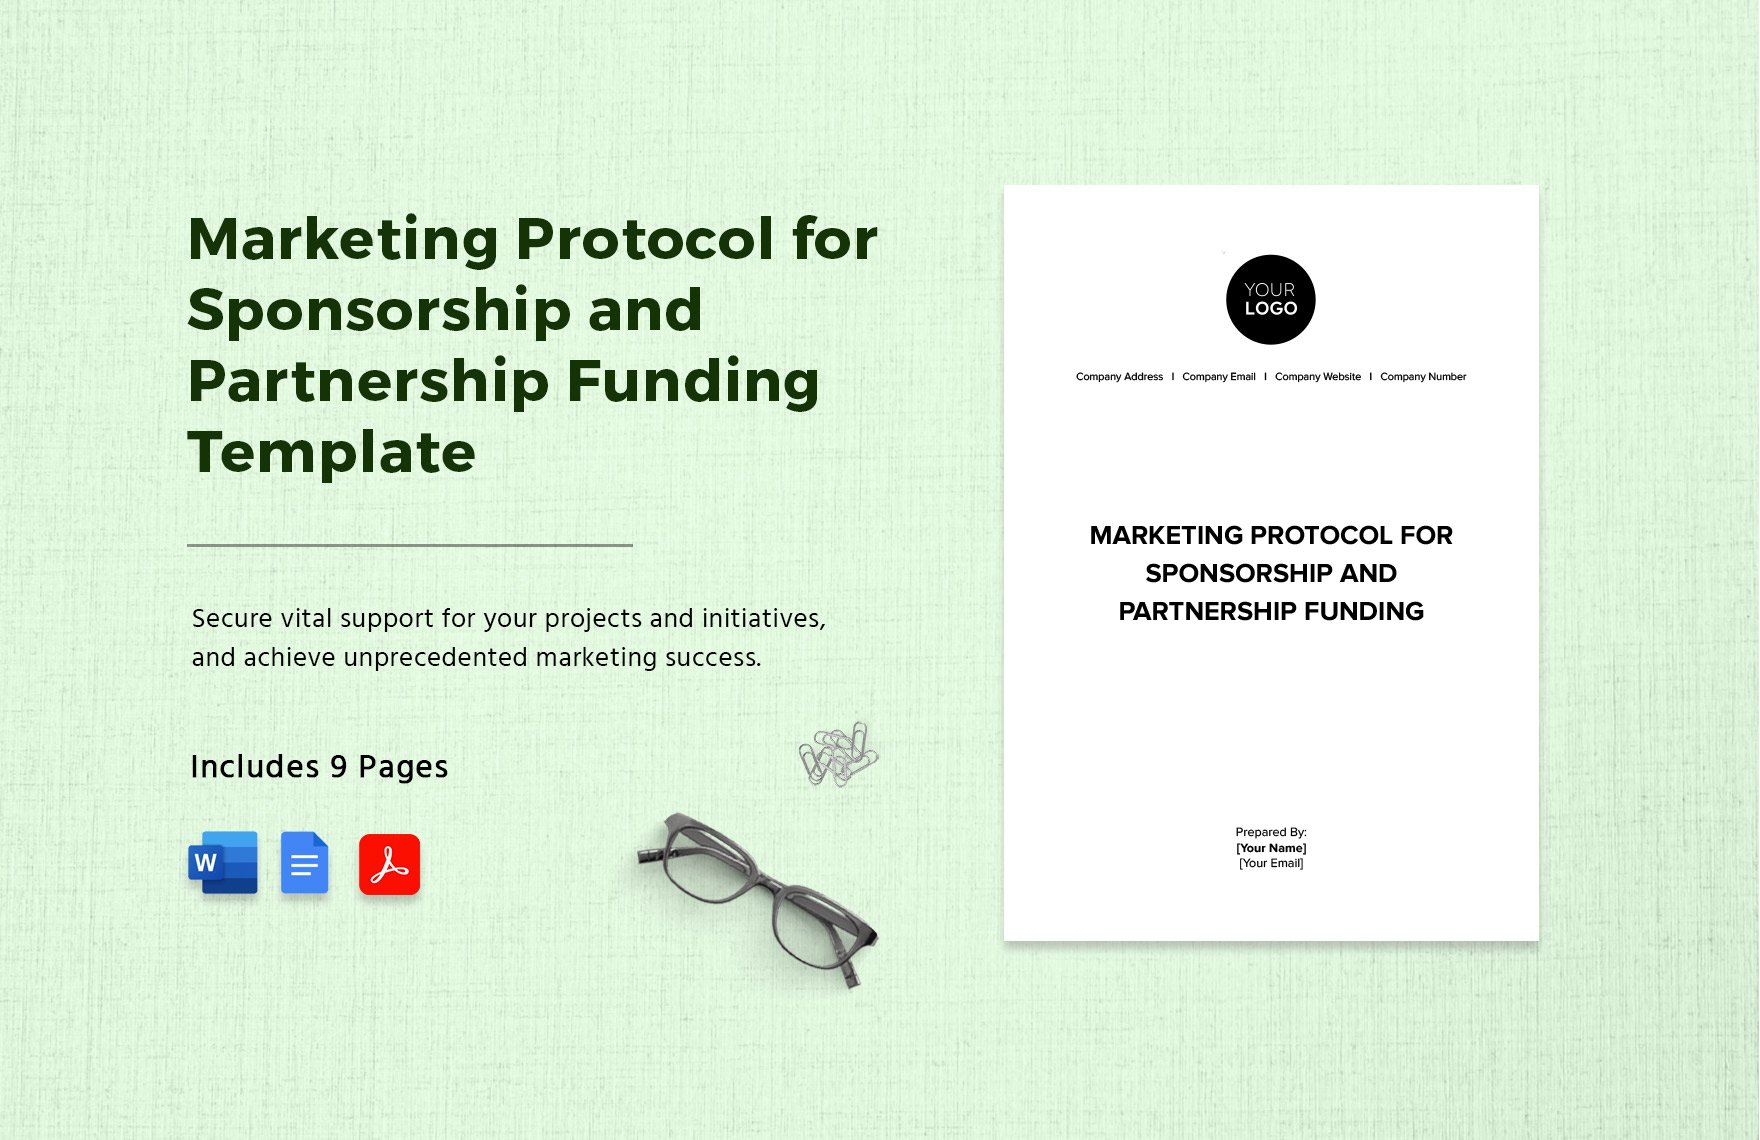 Marketing Protocol for Sponsorship and Partnership Funding Template